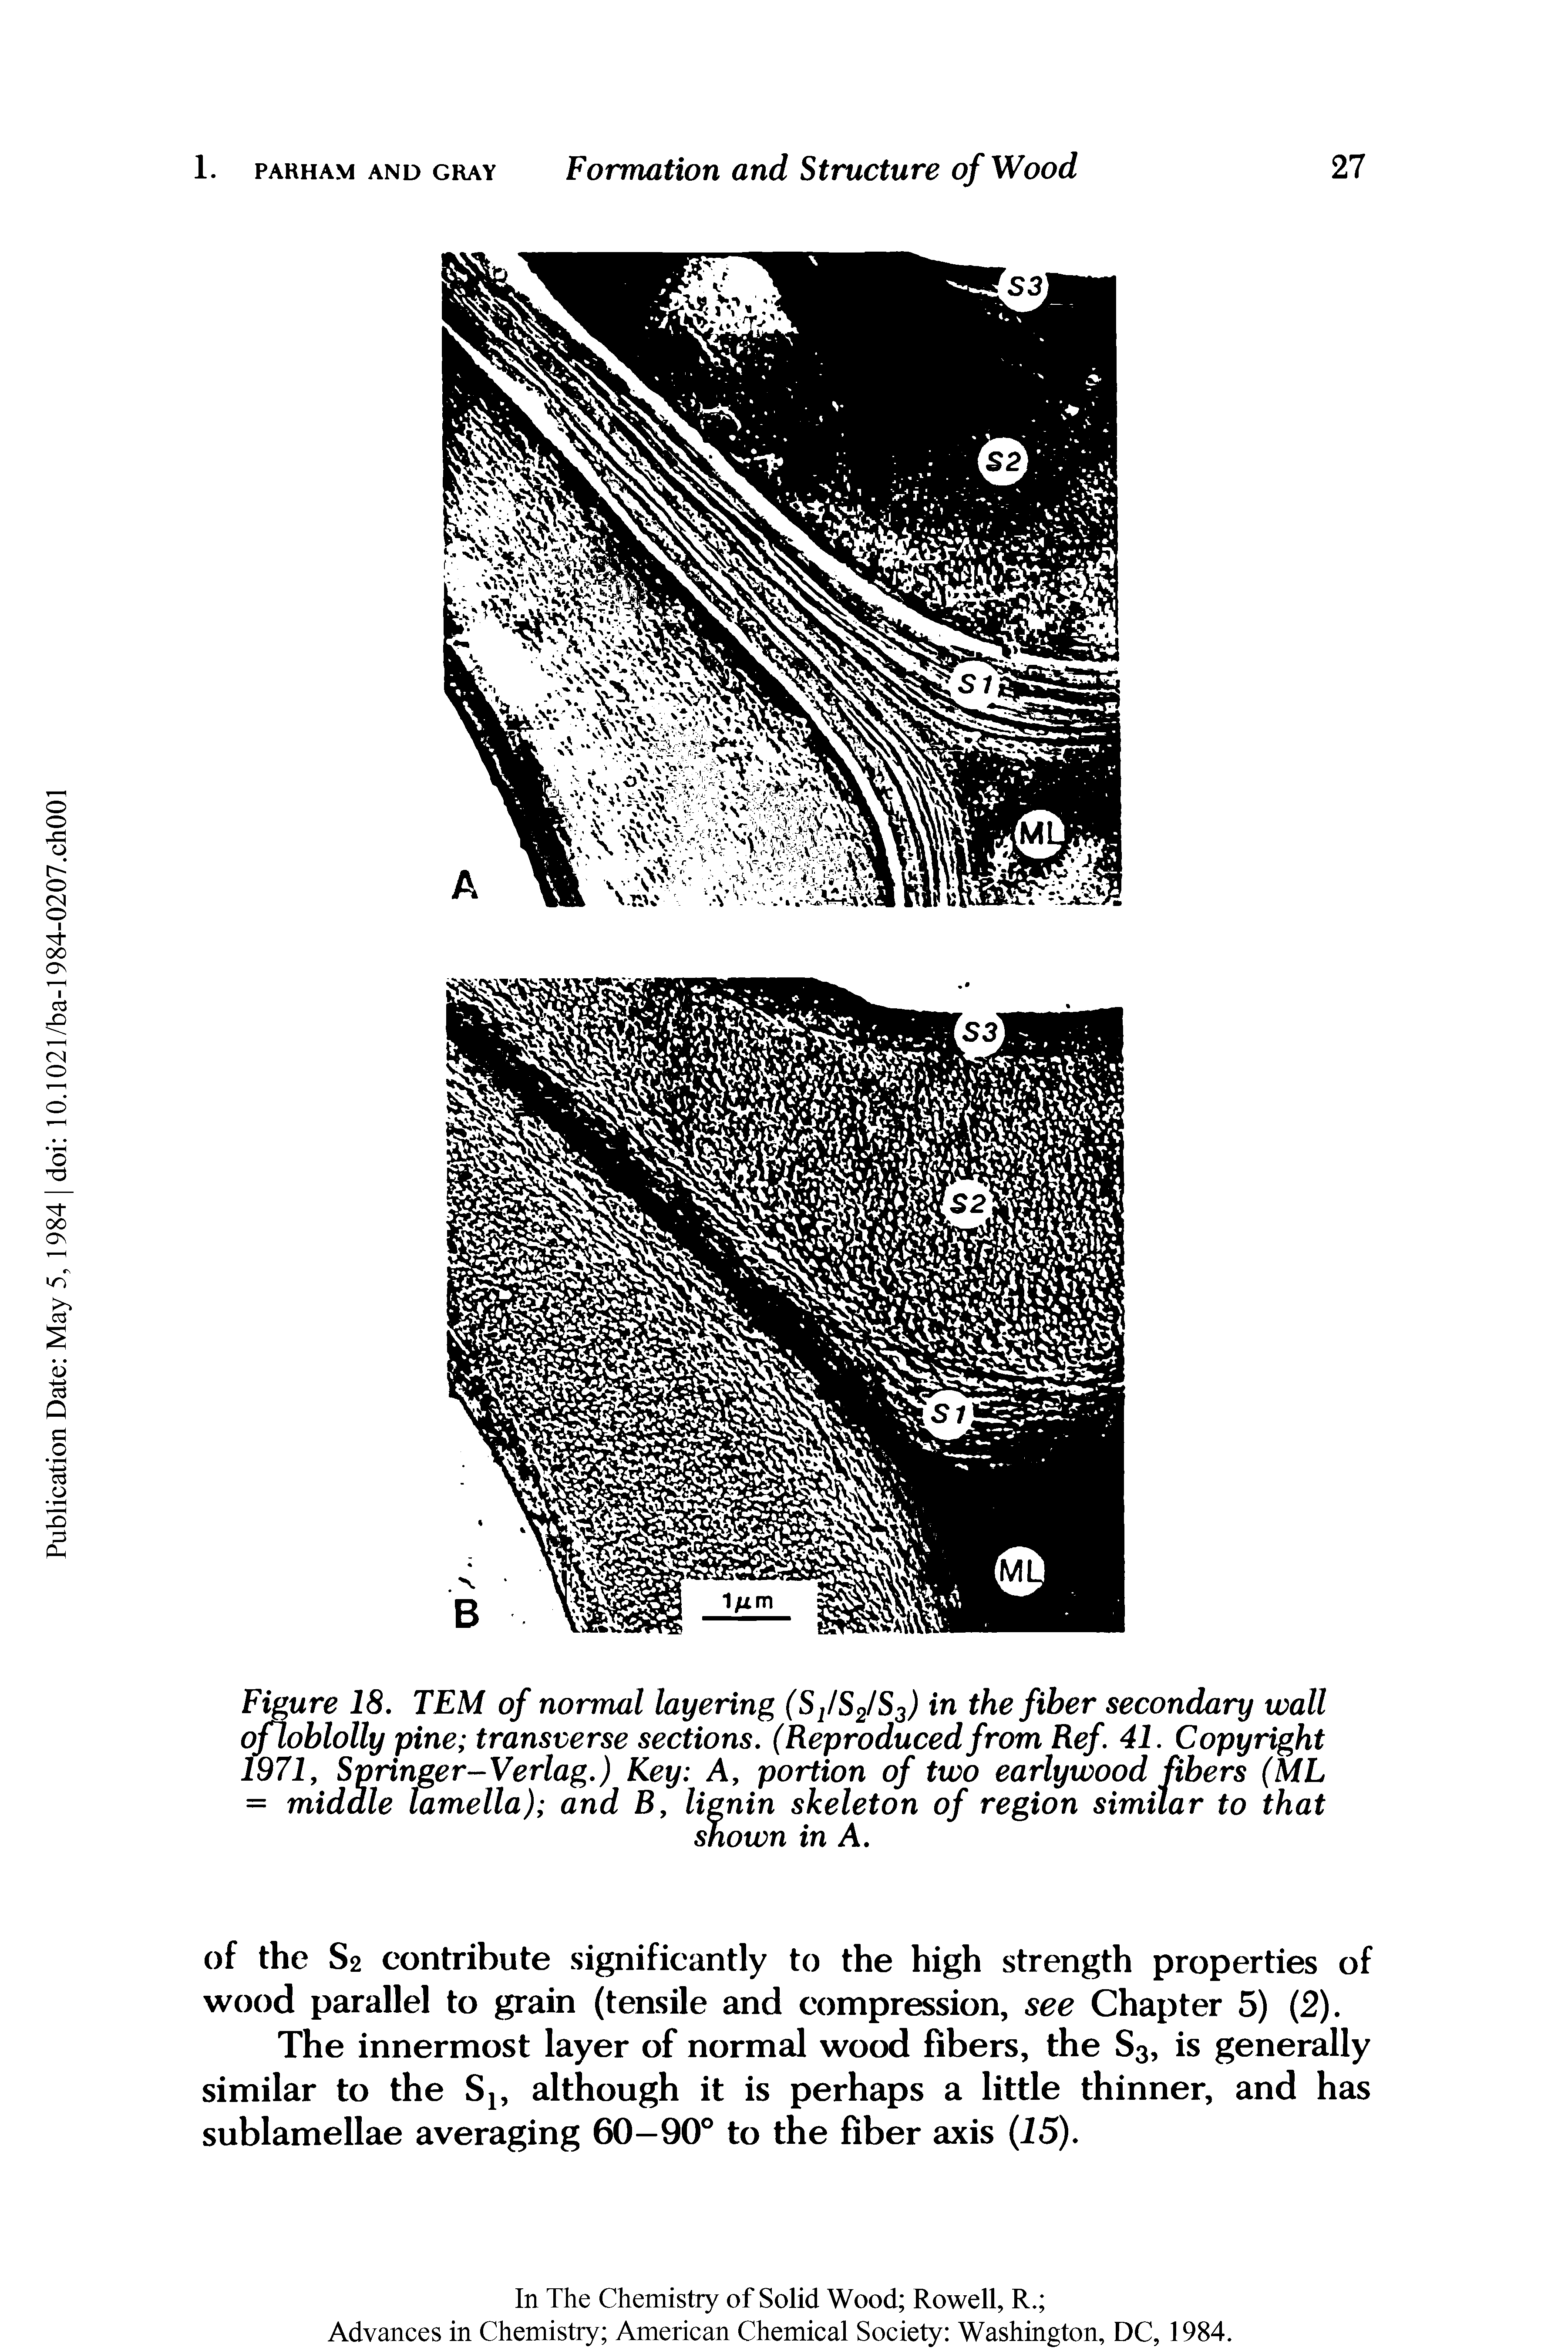 Figure 18. TEM of normal layering (SfSJS ) in the fiber secondary wall ofloblolly pine transverse sections. (Reproducedfrom Ref 41. Copyright 1971, Springer-Verlag.) Key A, portion of two earlywood fibers (ML = middle lamella) and B, lignin skeleton of region simitar to that...